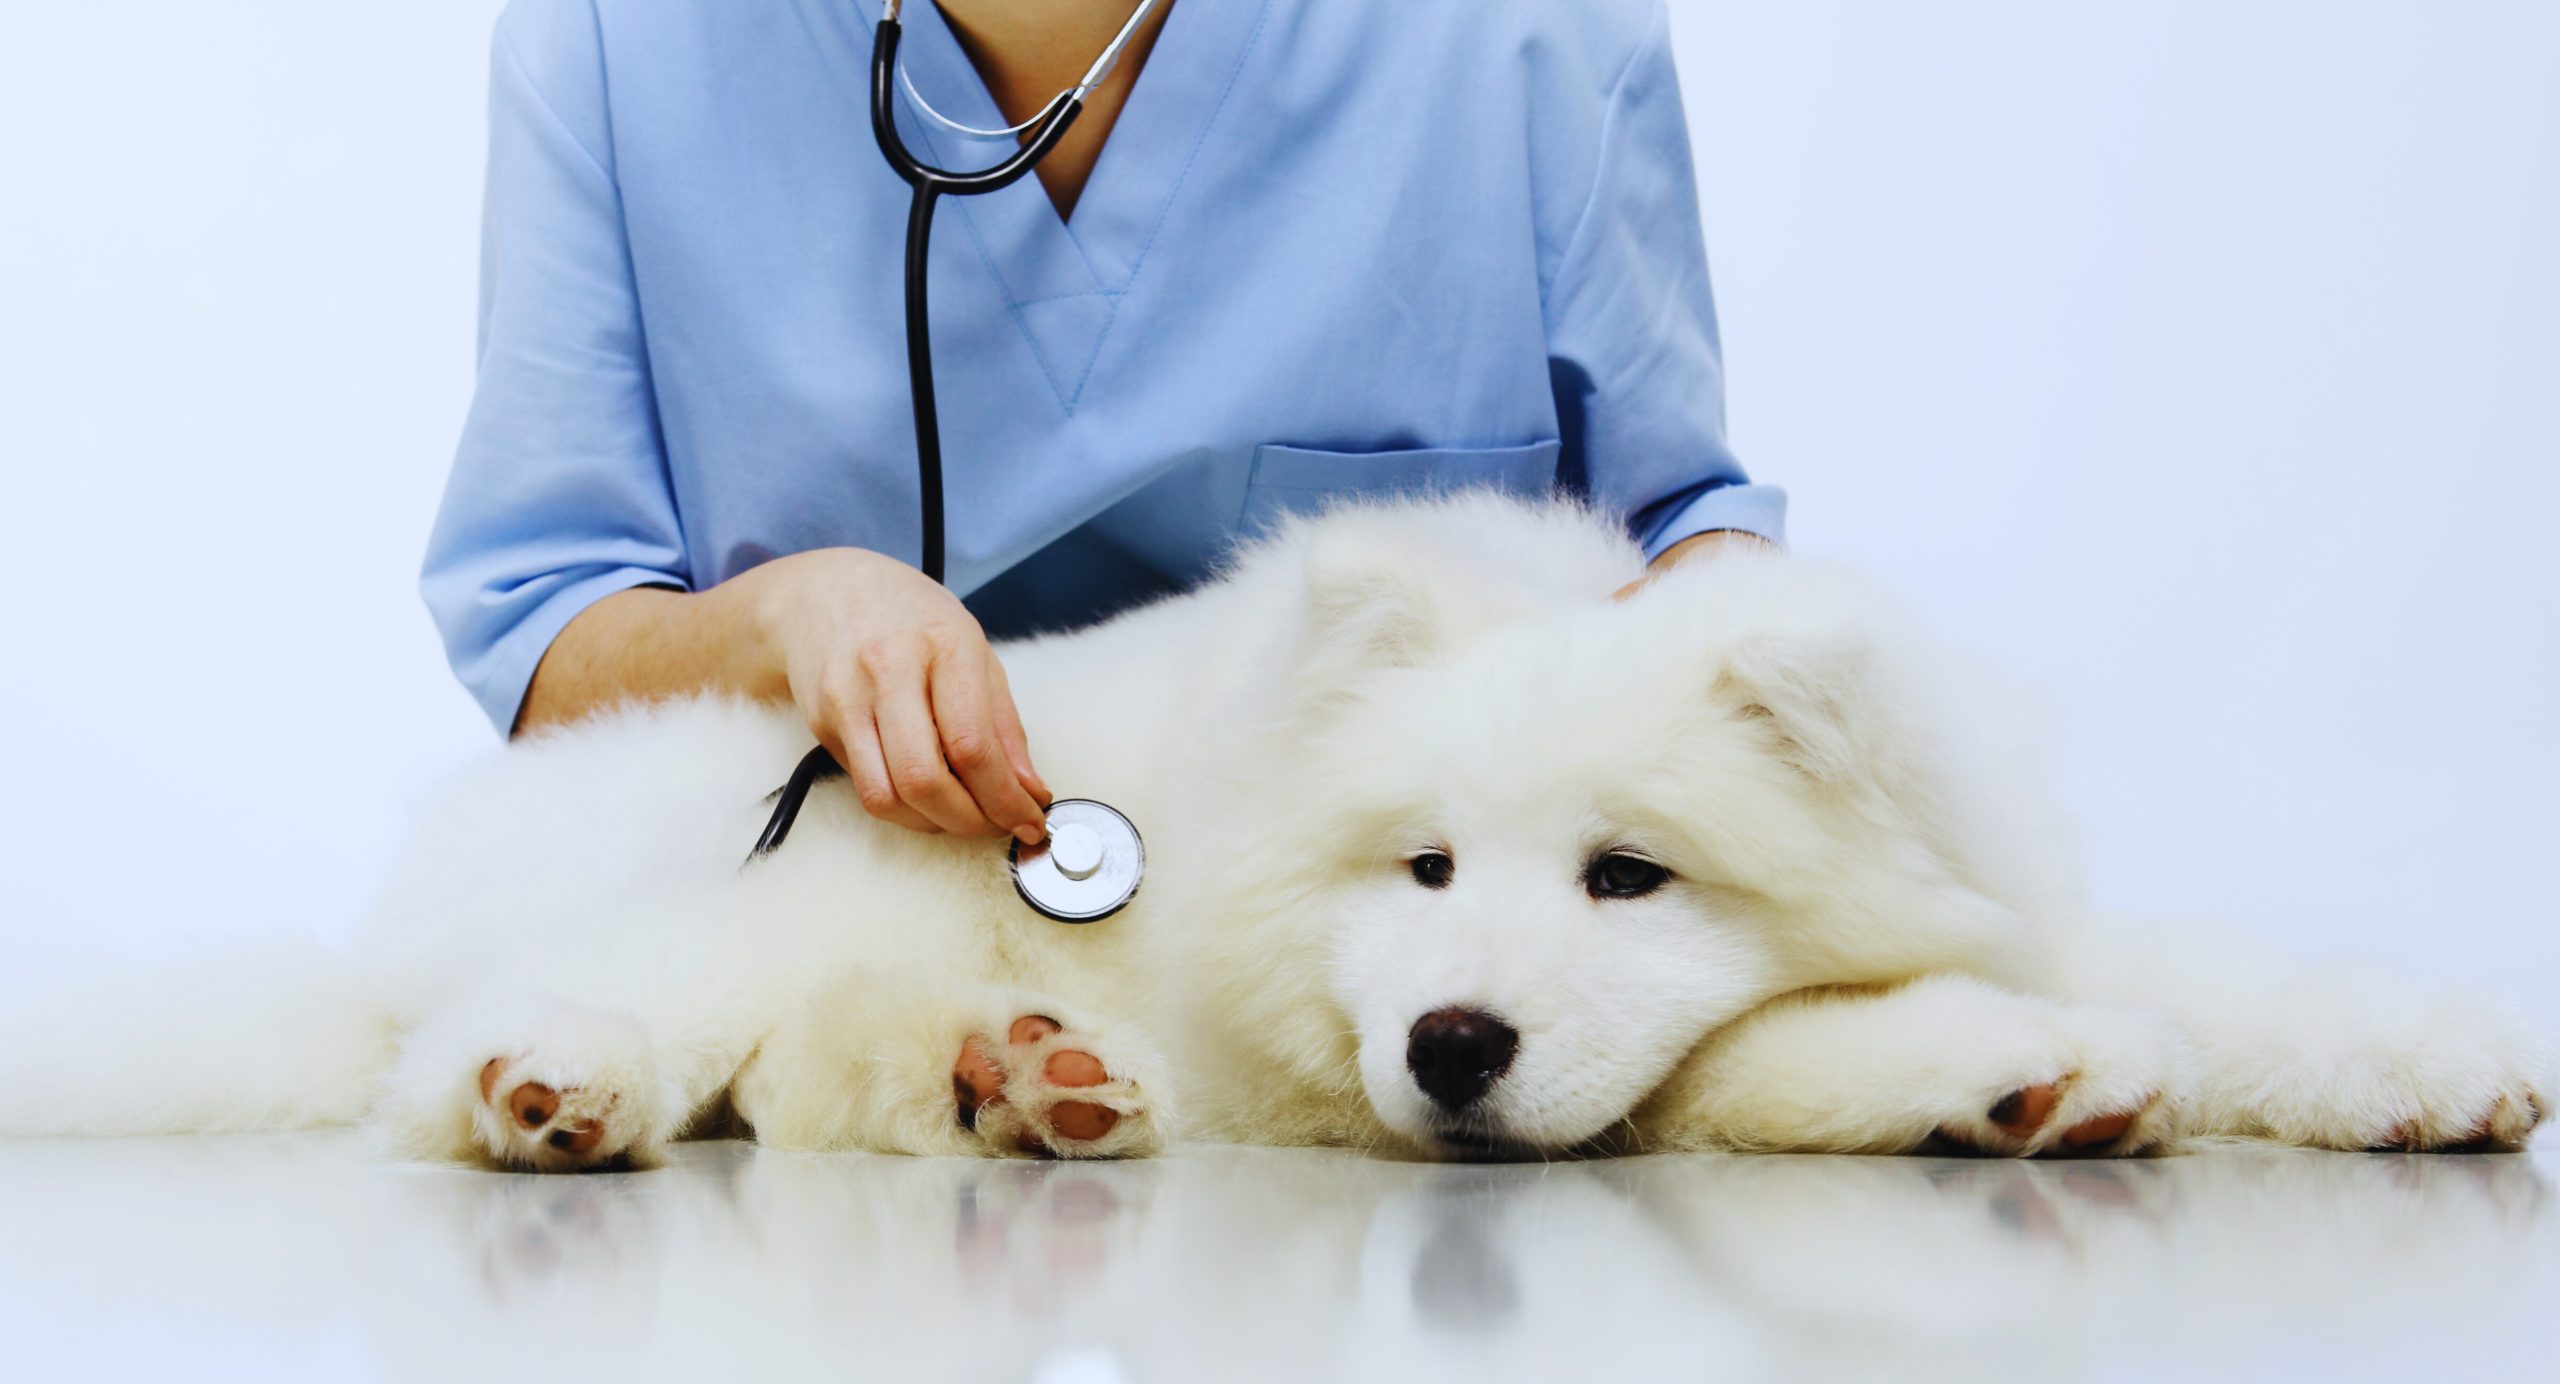 of Bladder Infections in Dogs